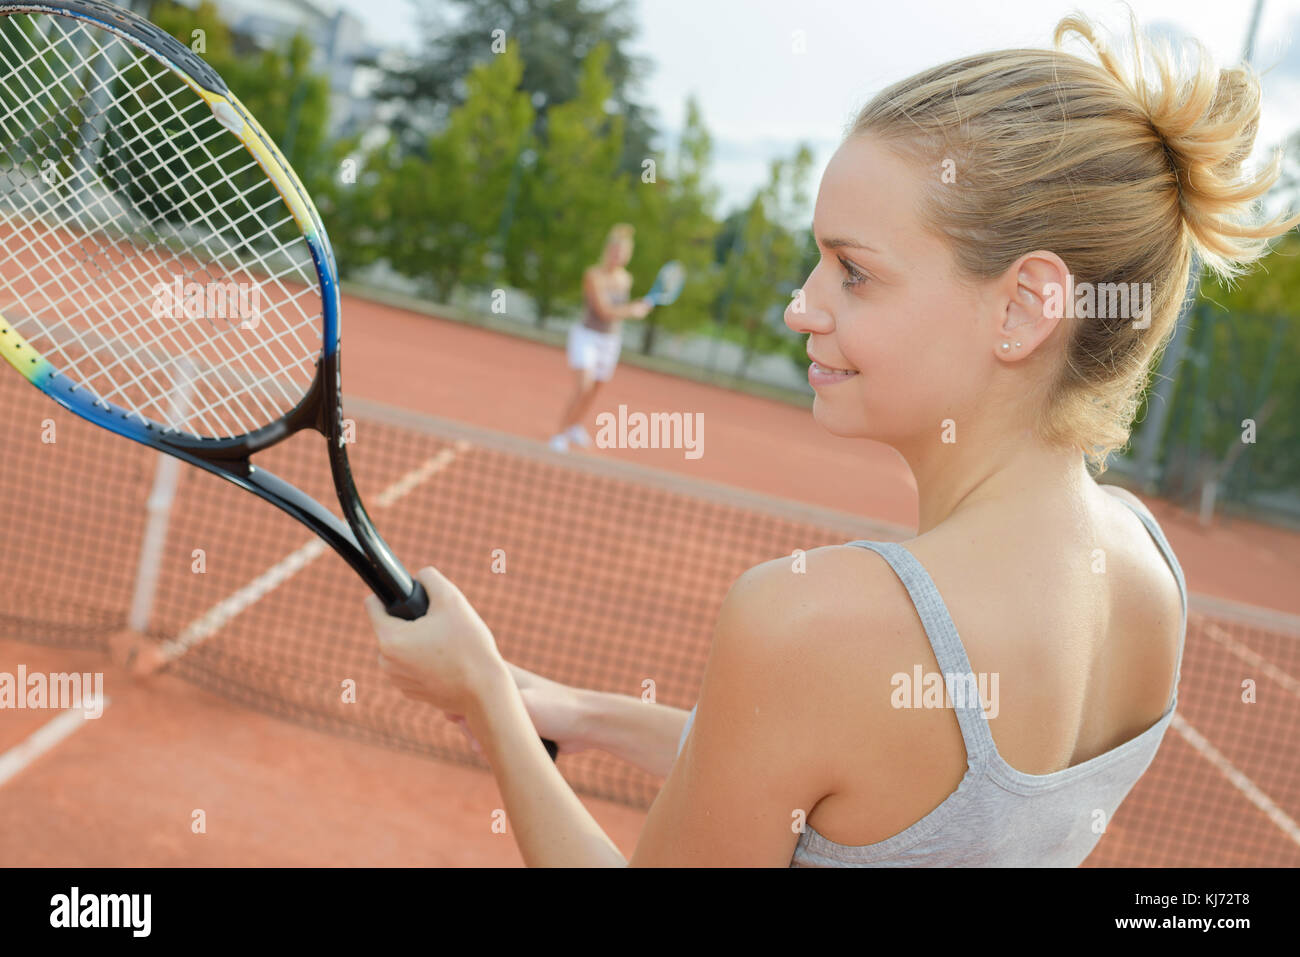 first tennis session Stock Photo